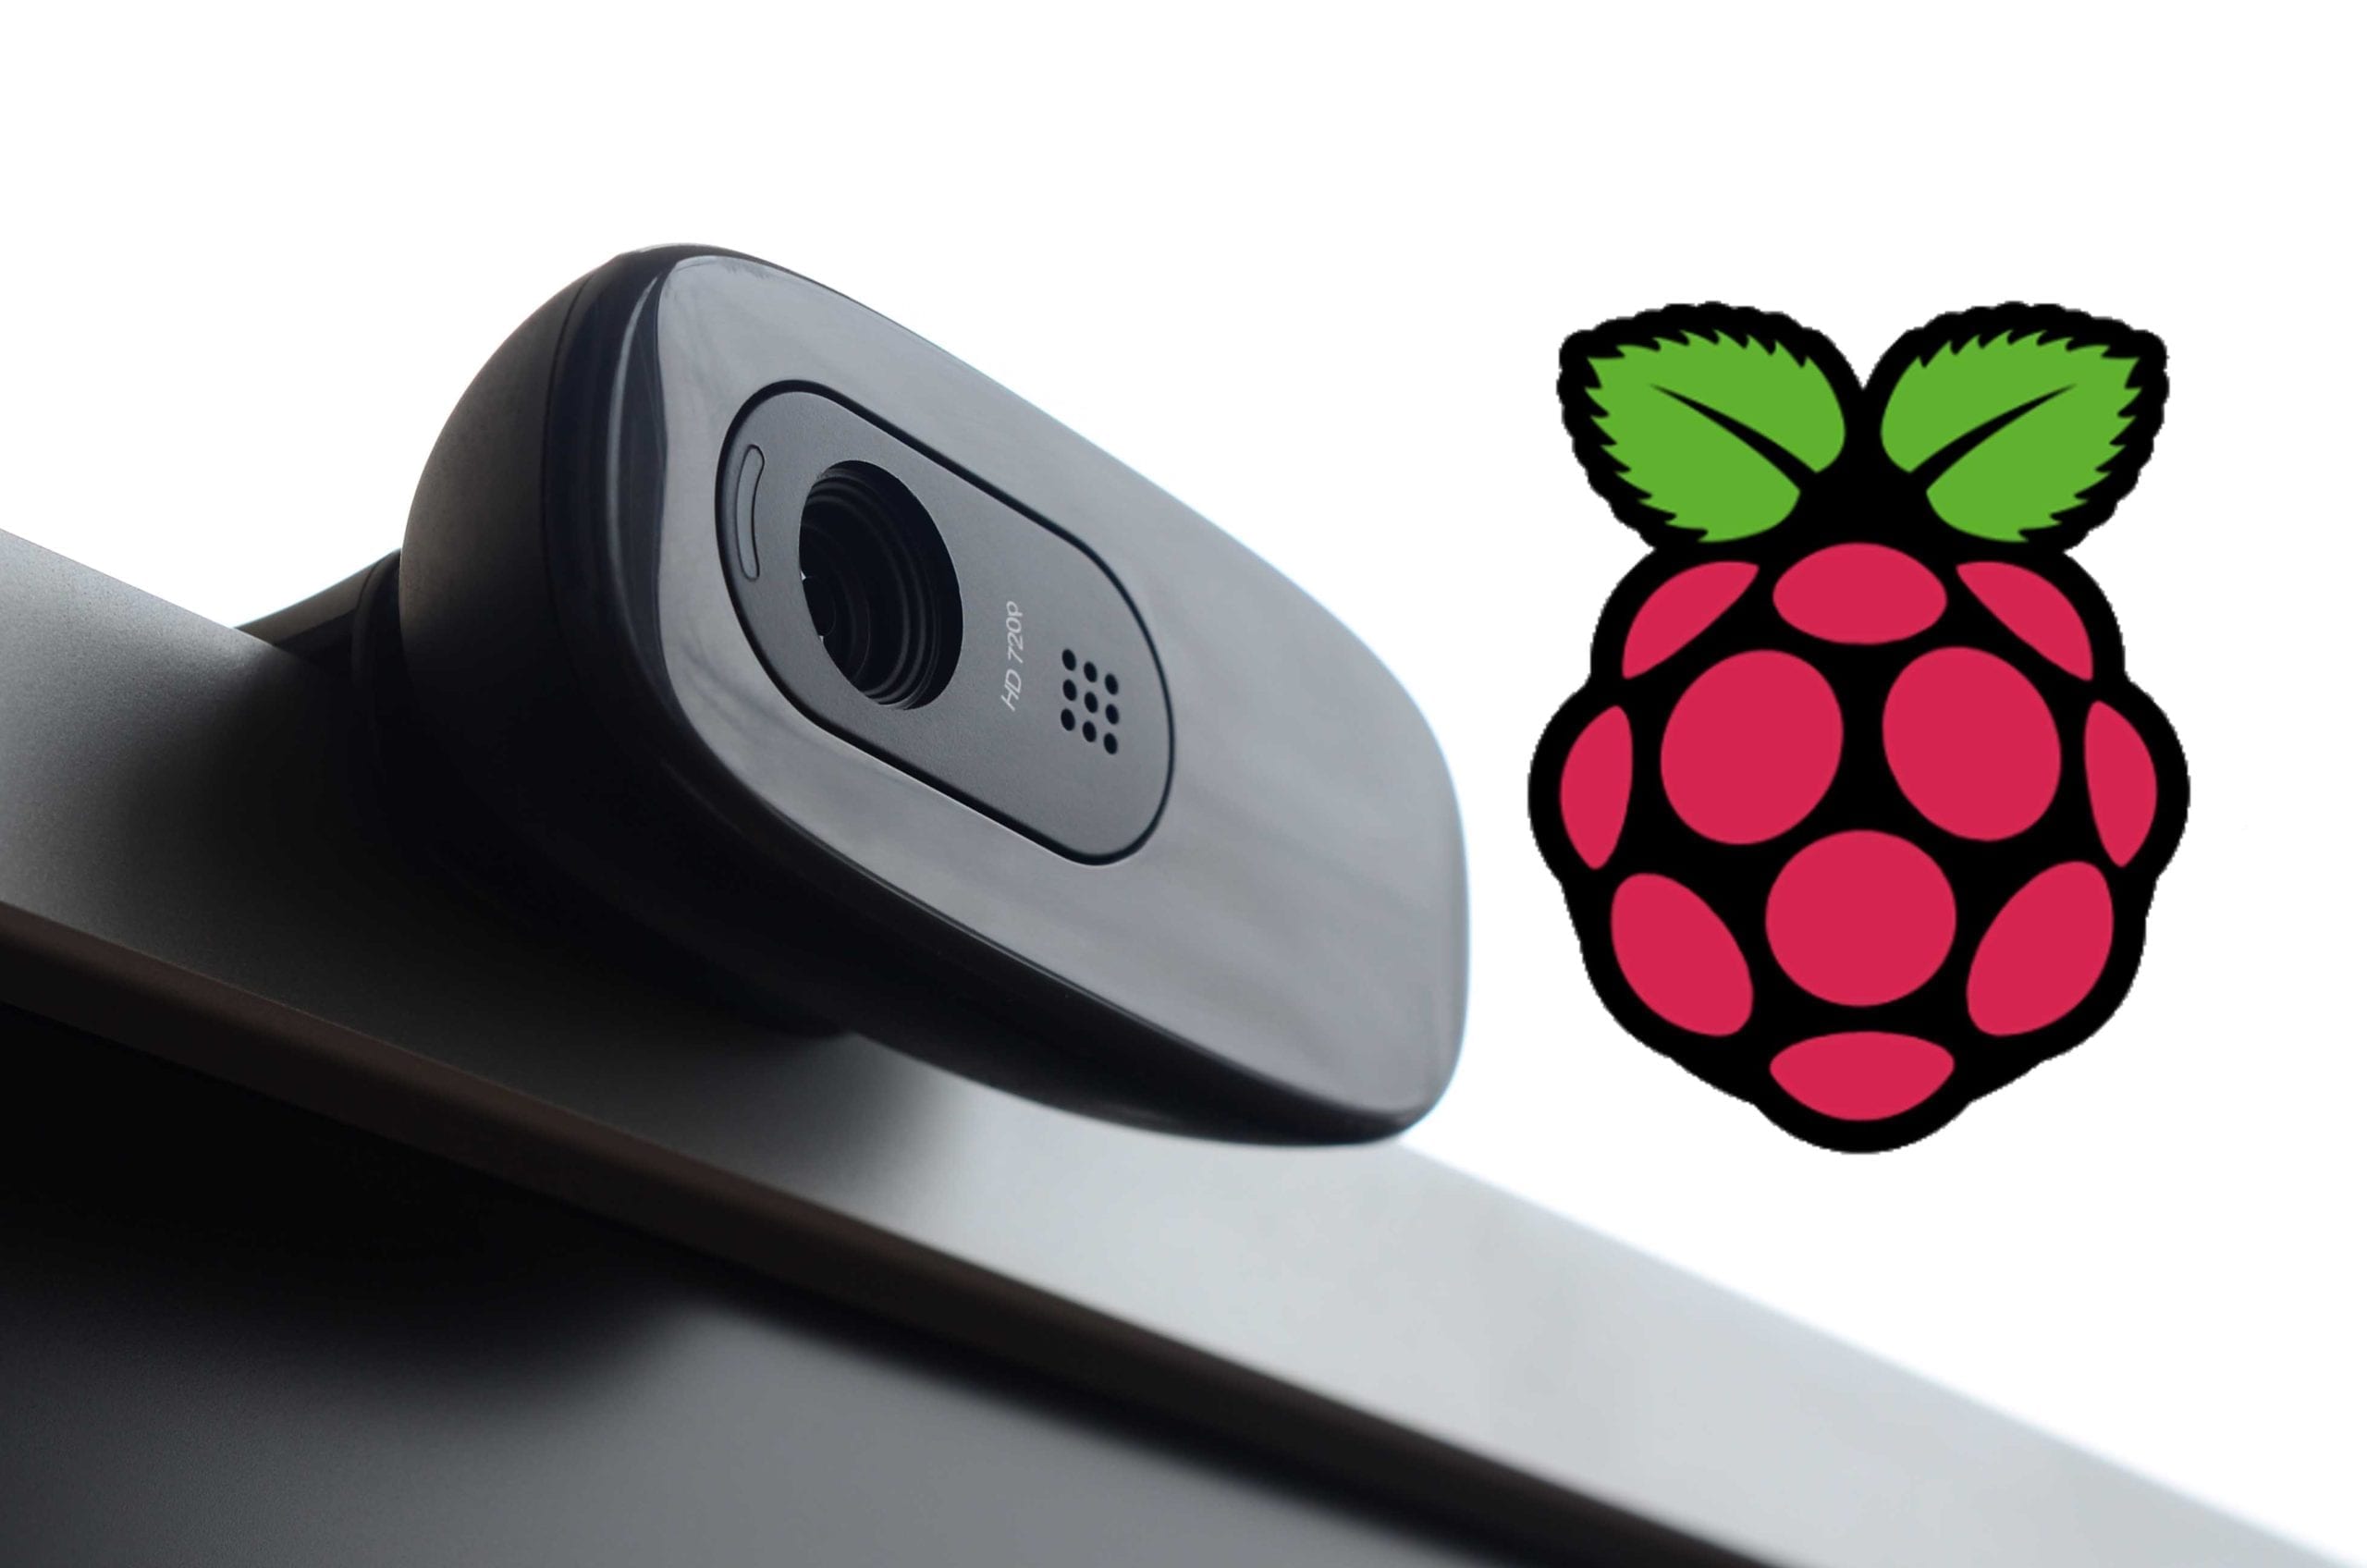 USB Webcam access in your Raspberry Pi